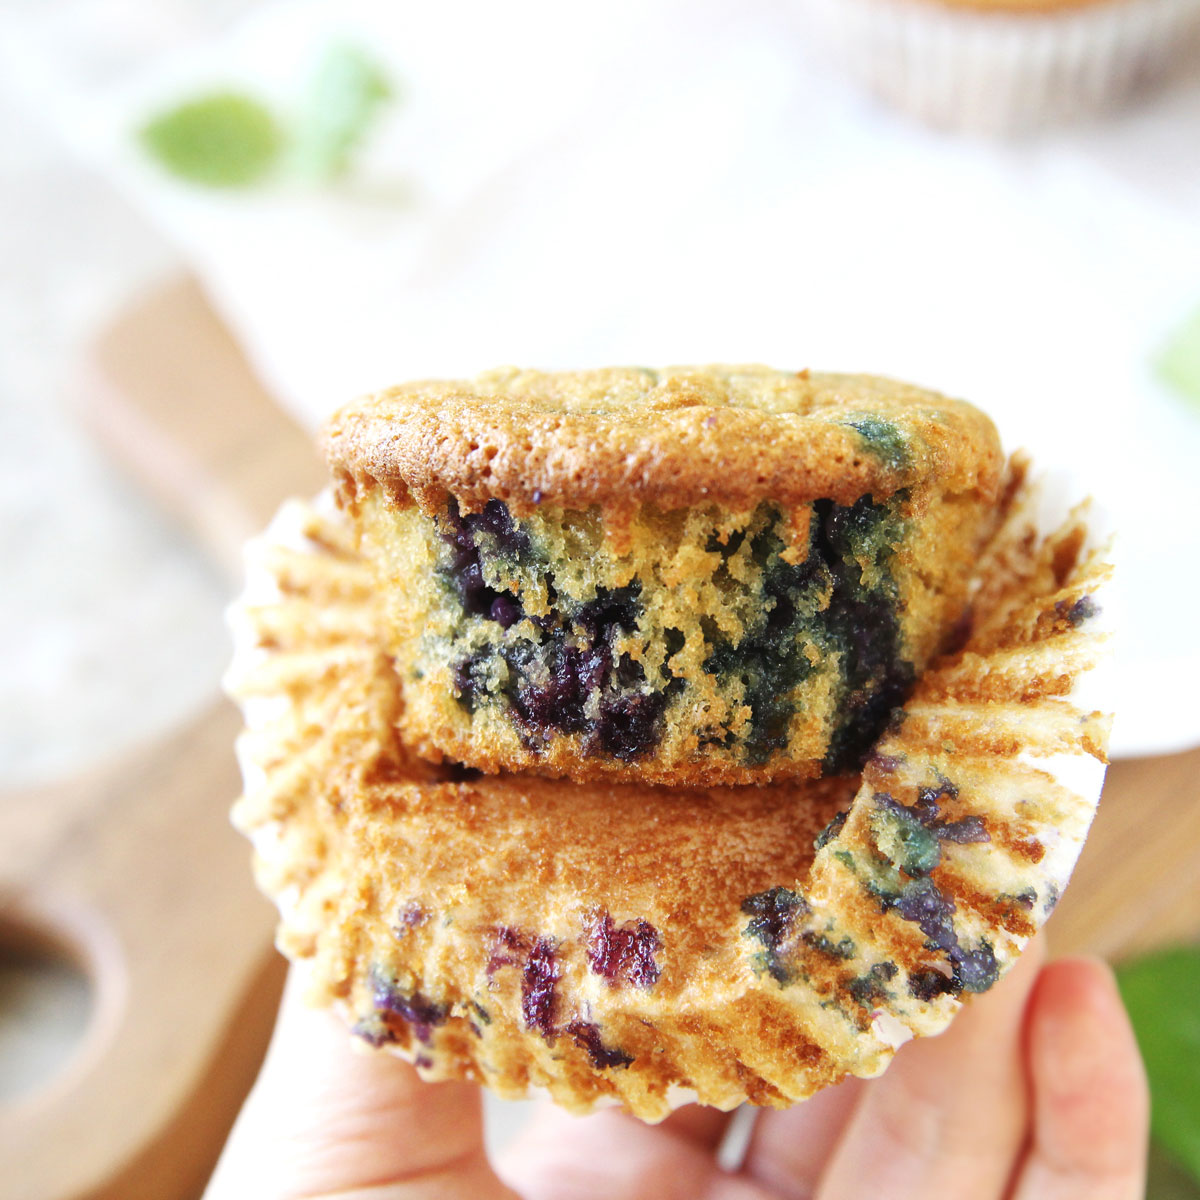 Paleo Cauliflower Blueberry Muffins Made in the Food Processor - PB Fit Nice Cream